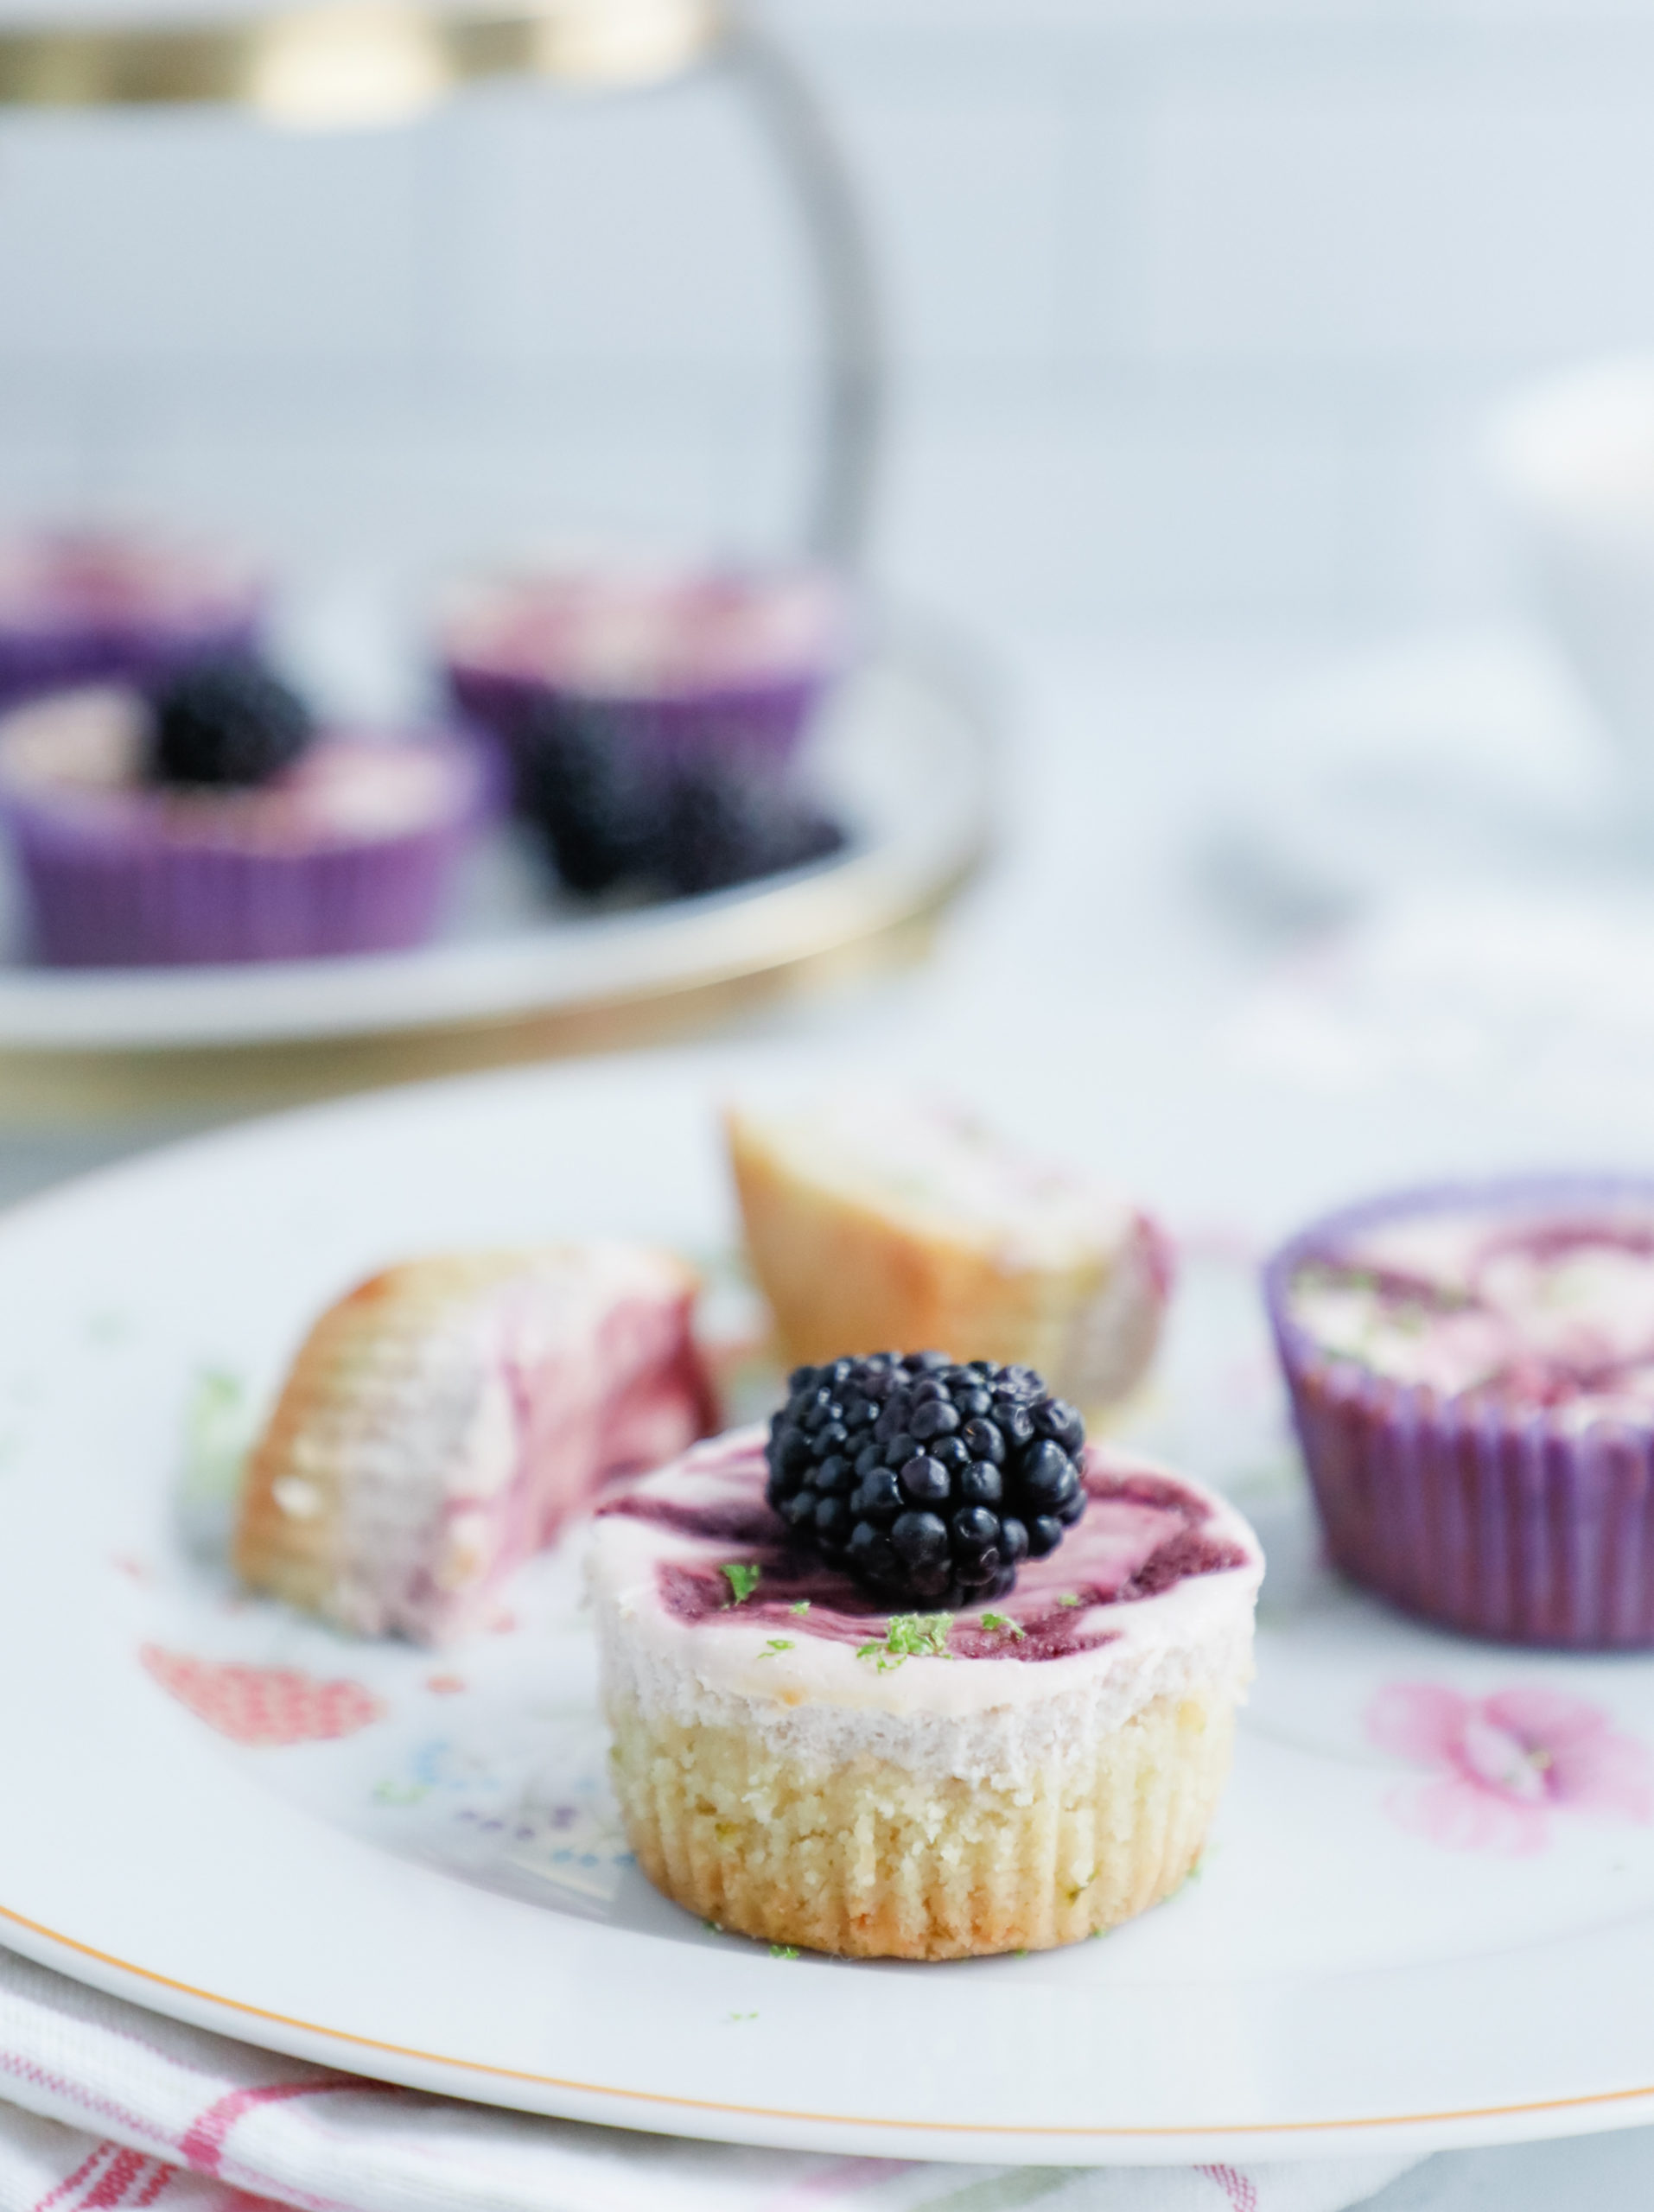 Blackberry Lime Cheesecakes with a blackberry garnish on a flowered plate